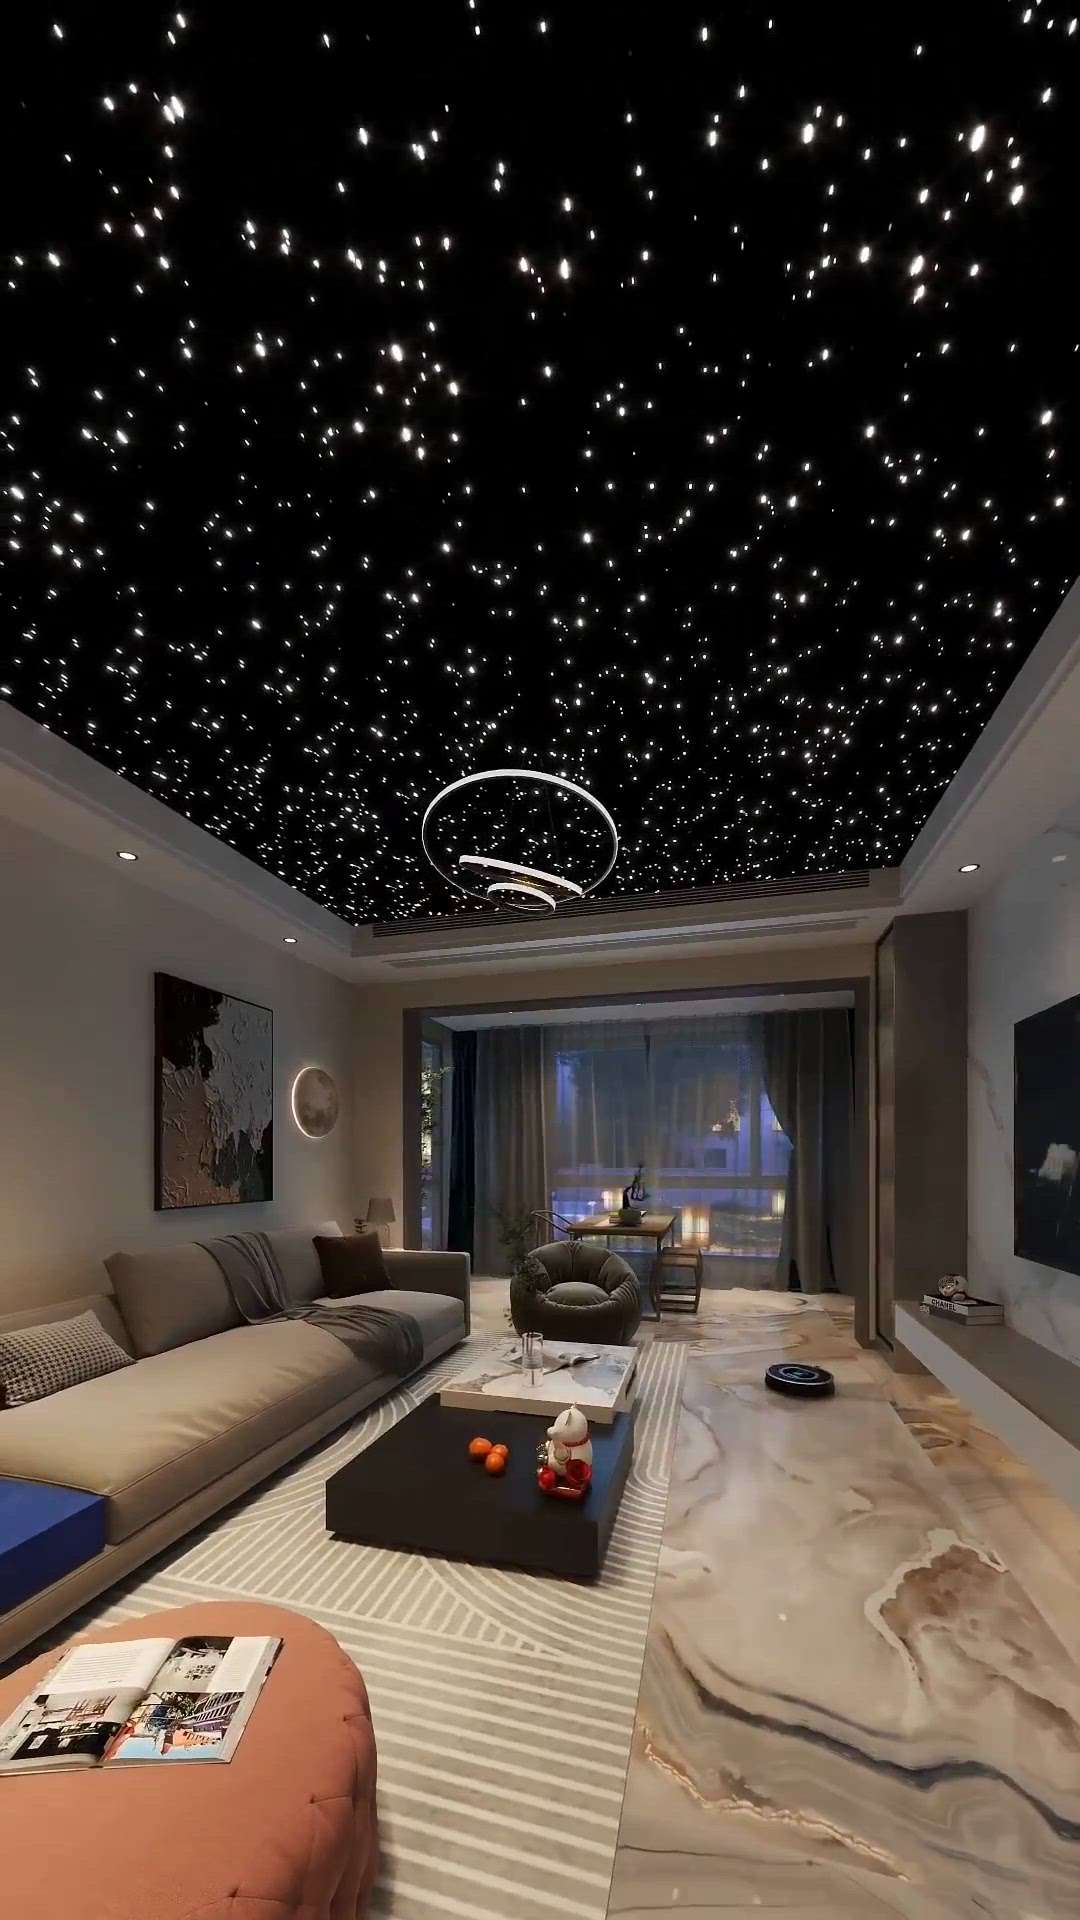 Under the stars feeling at your home